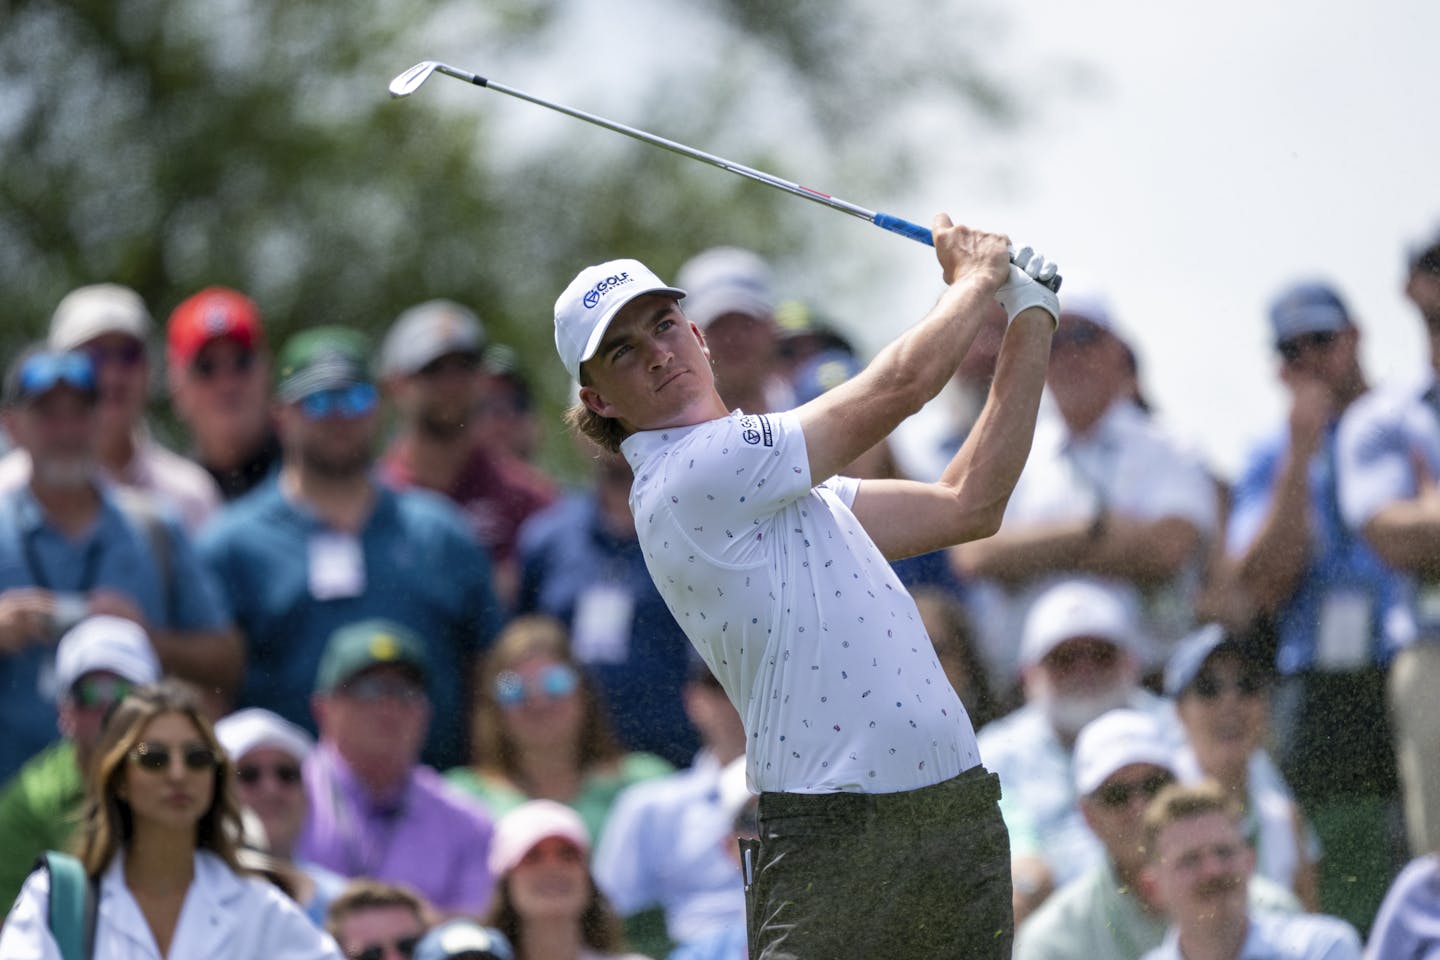 Jasper Stubbs of Australia plays a stroke from the No. 1 tee during the Par 3 Contest prior to the 2024 Masters Tournament